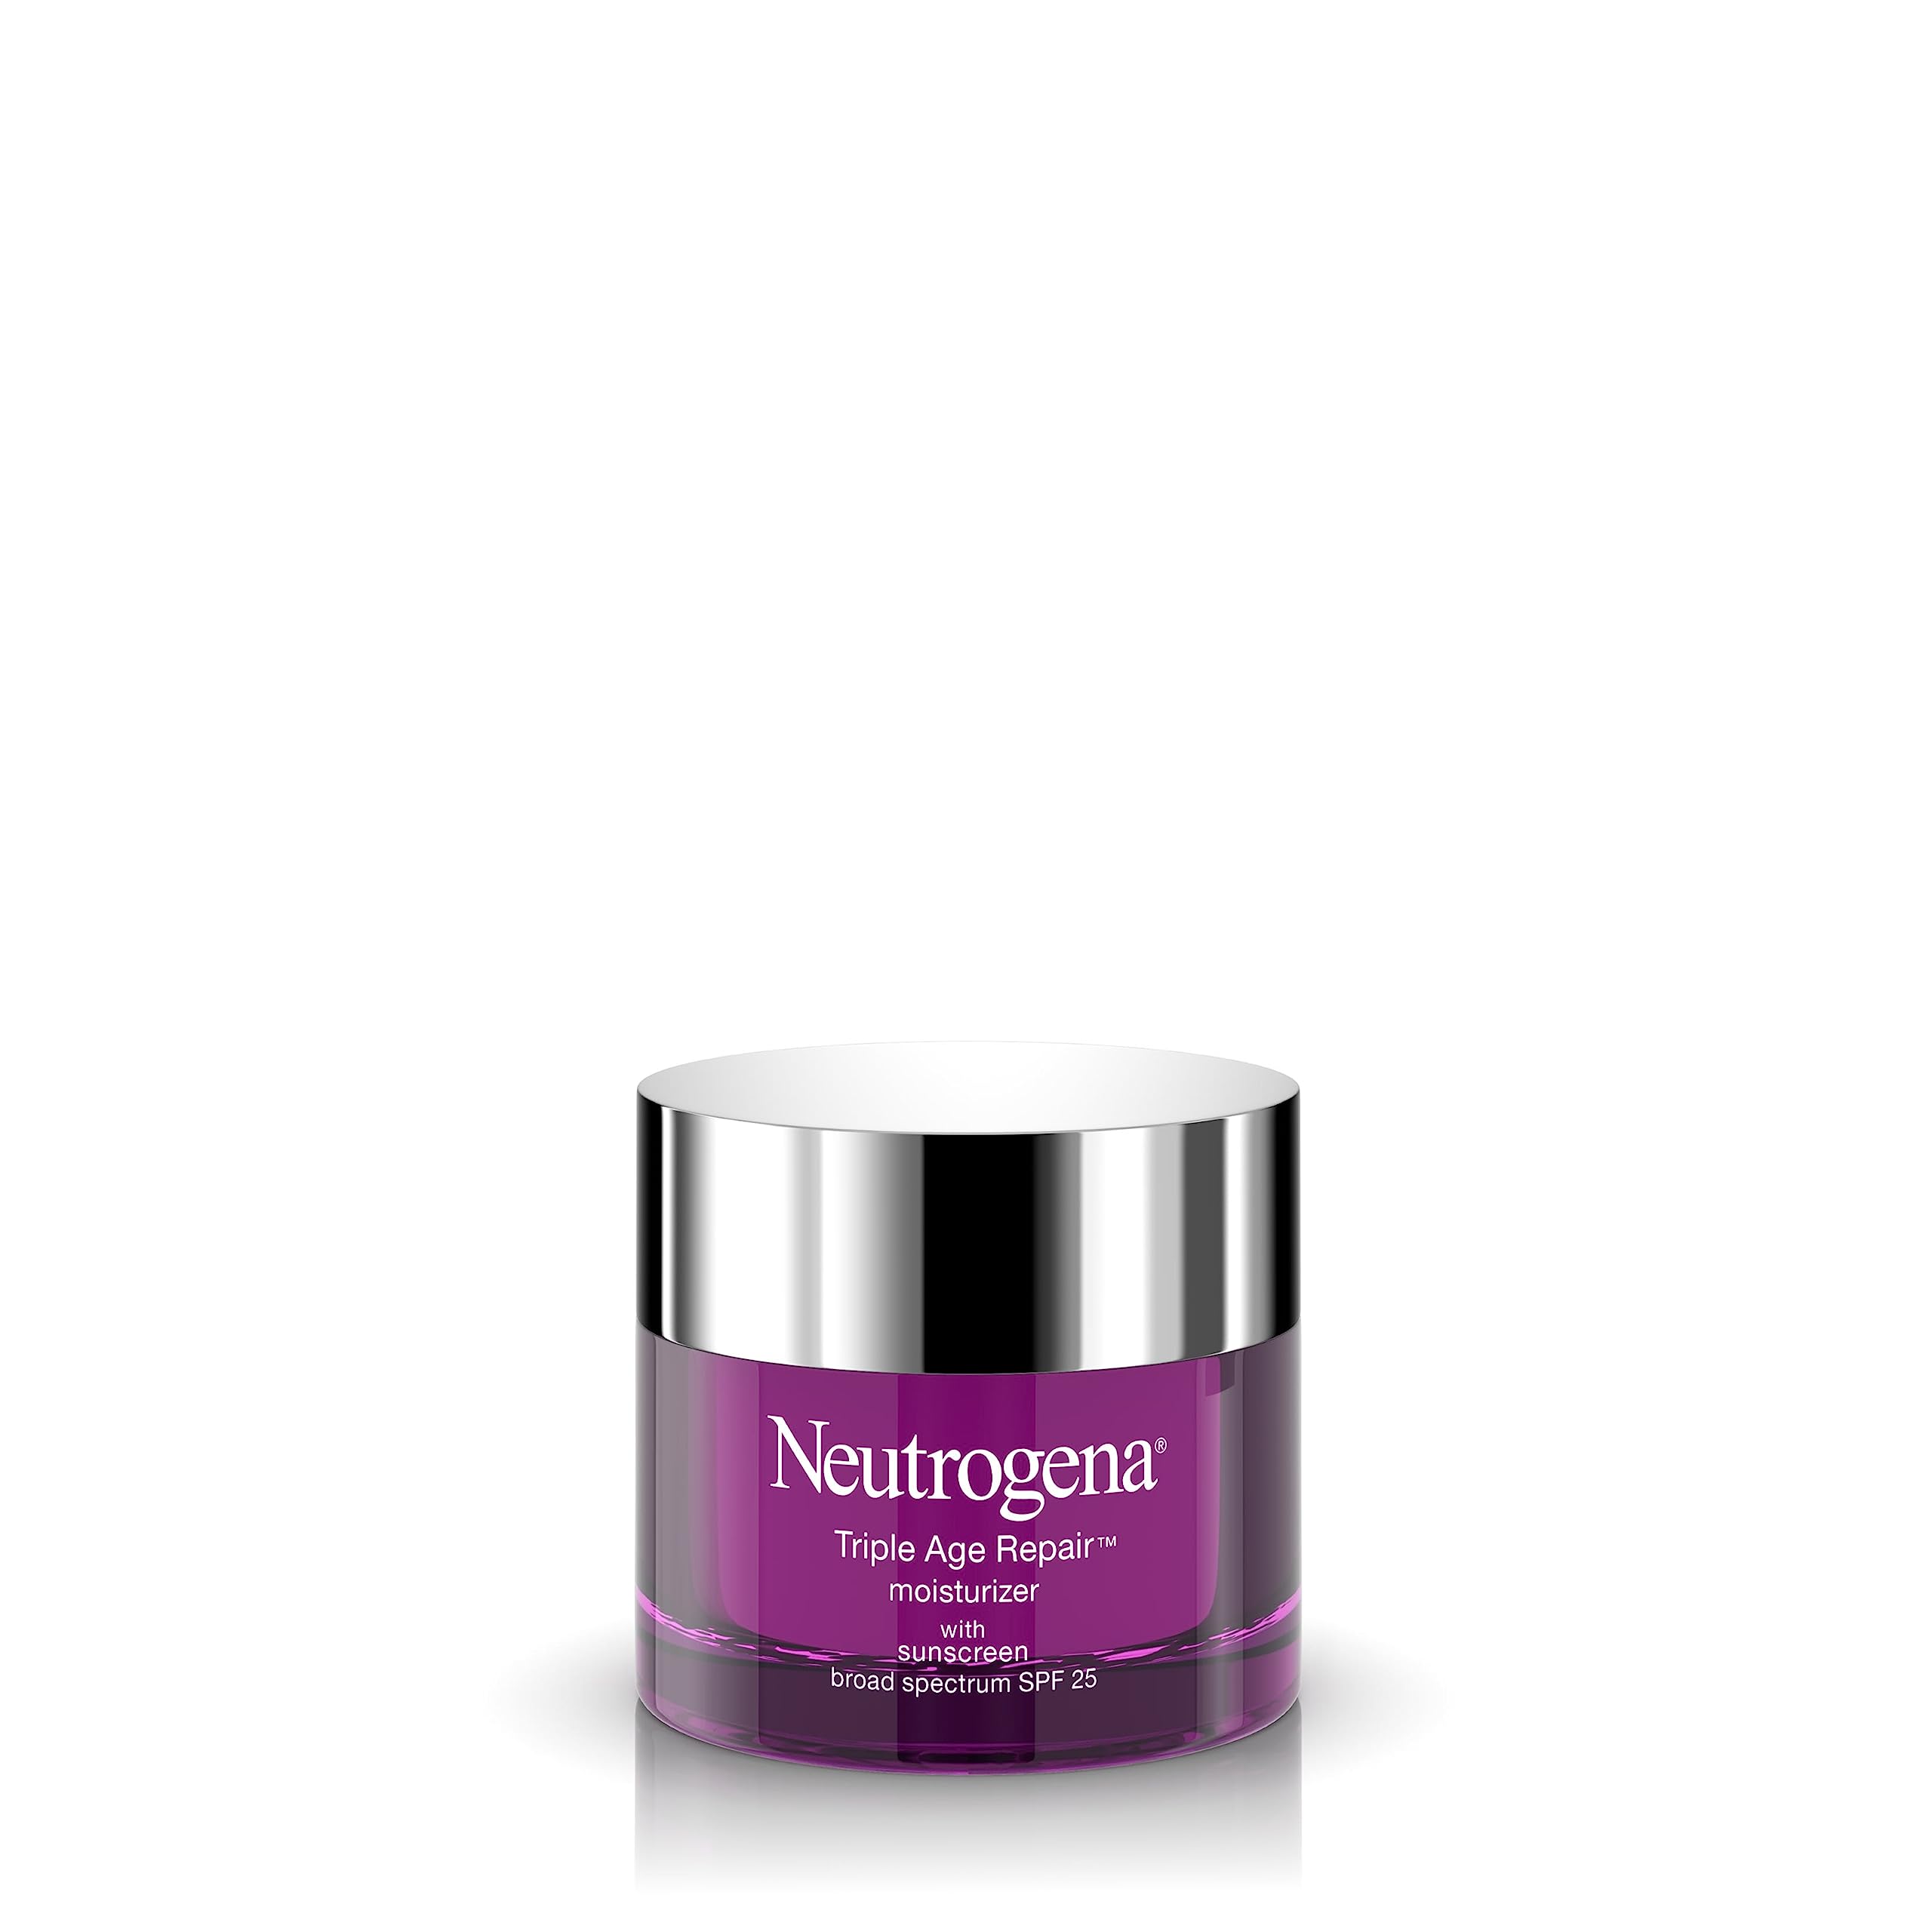 Neutrogena Triple Age Repair Anti-Aging Daily Facial Moisturizer with SPF 25 Sunscreen & Vitamin C, Firming Anti-Wrinkle Face & Neck Cream for Dark Spots, Glycerin & Shea Butter, 1.7 oz